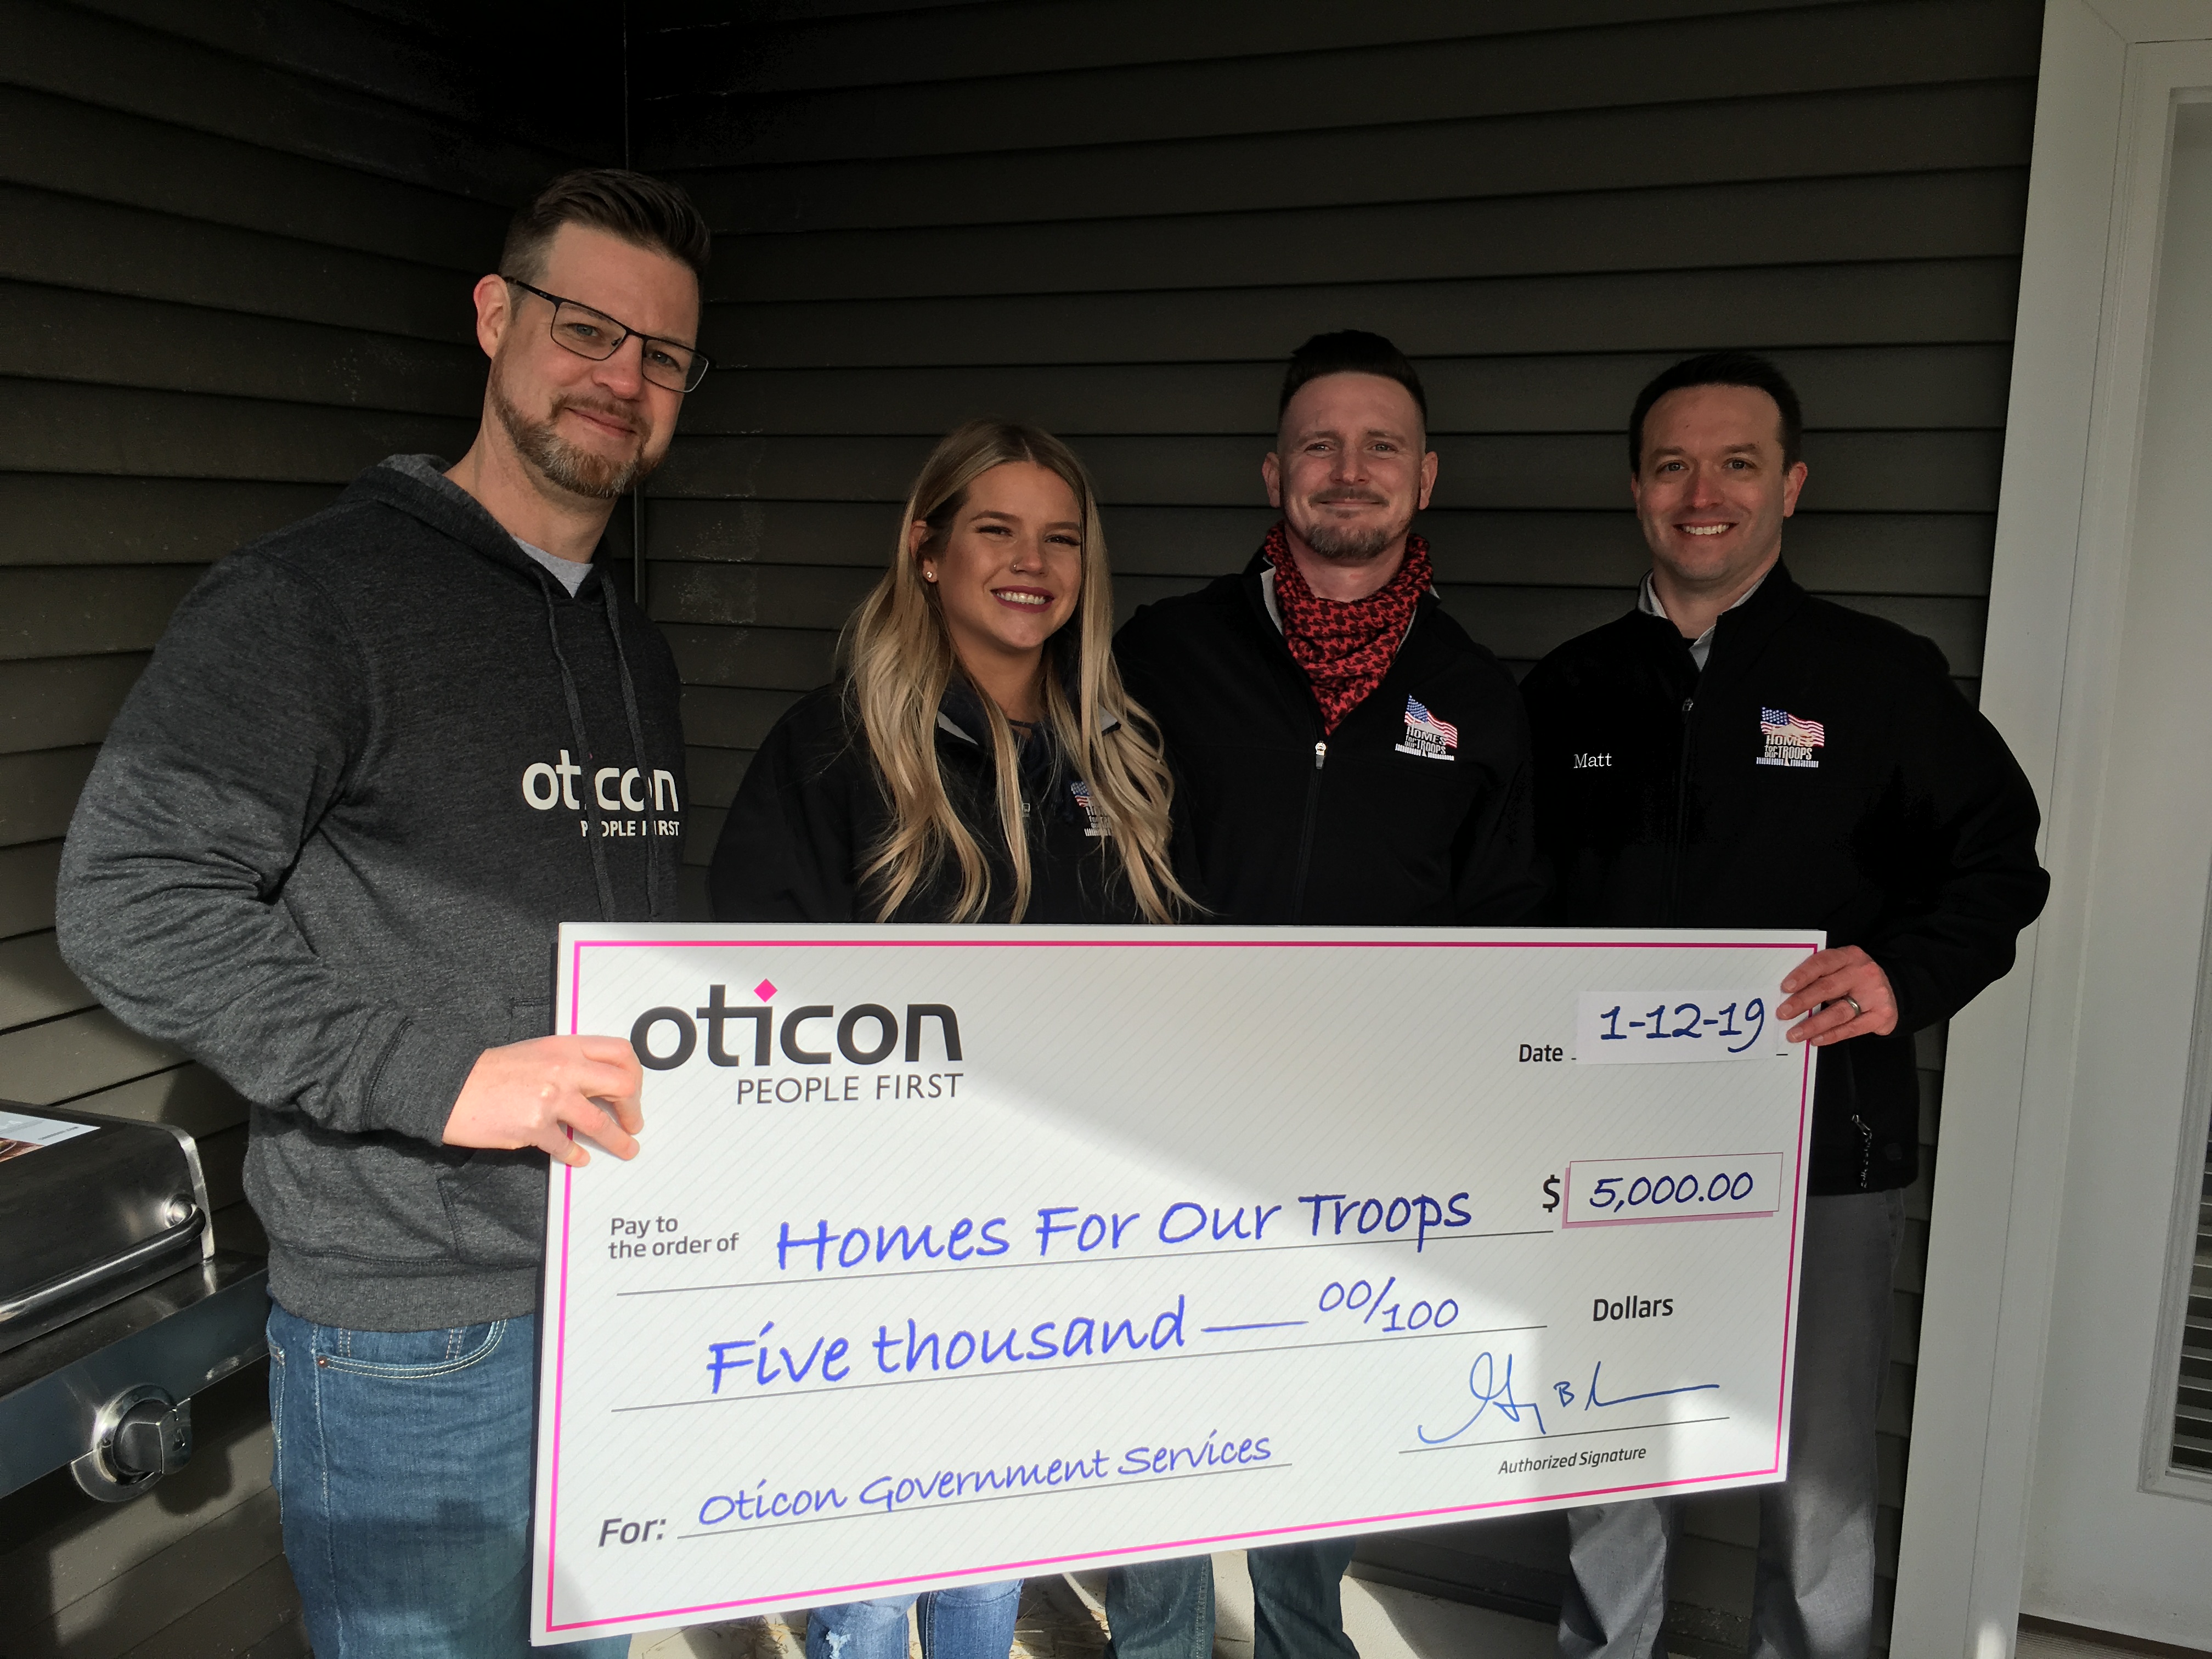 Dowd presented a $5000 check from Oticon to HFOT Manager of Corporate Philanthropy Matt McGuire to support the home build